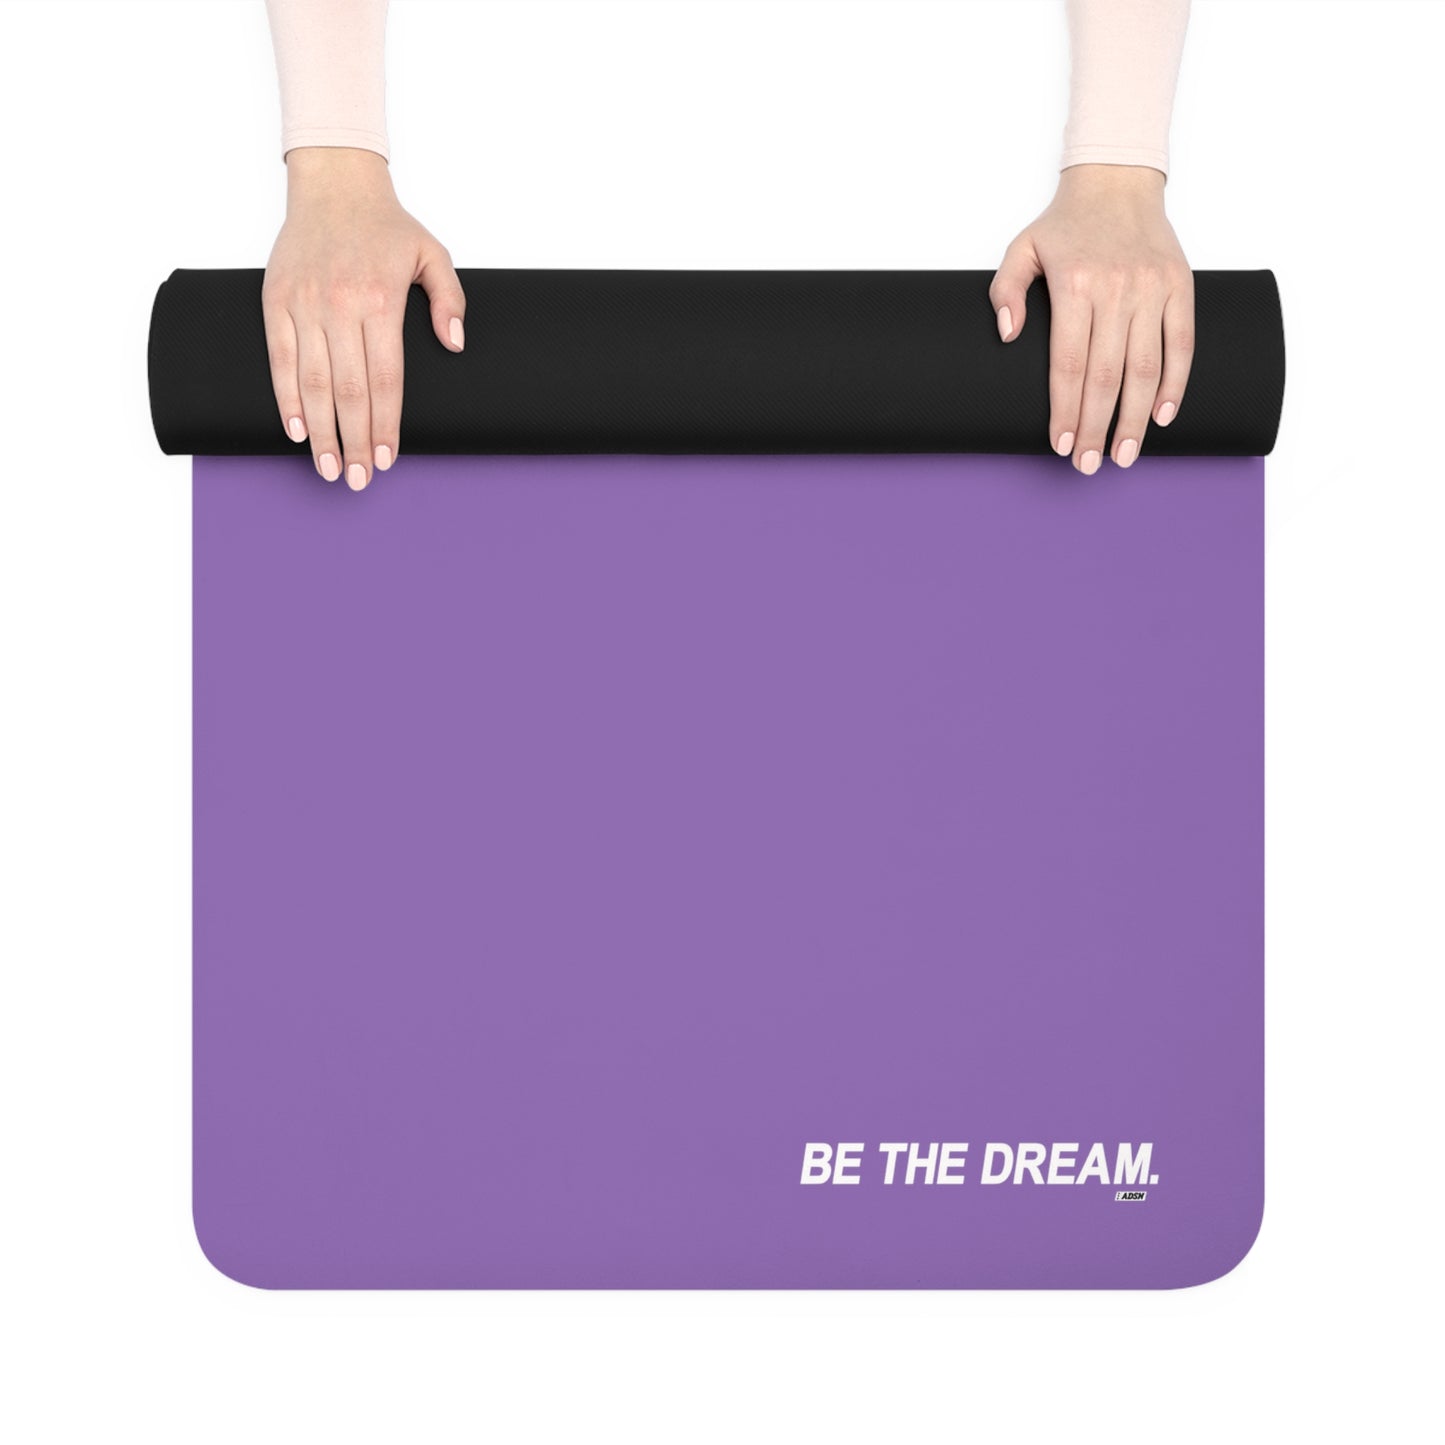 "Be The Dream" Rubber Yoga Mat